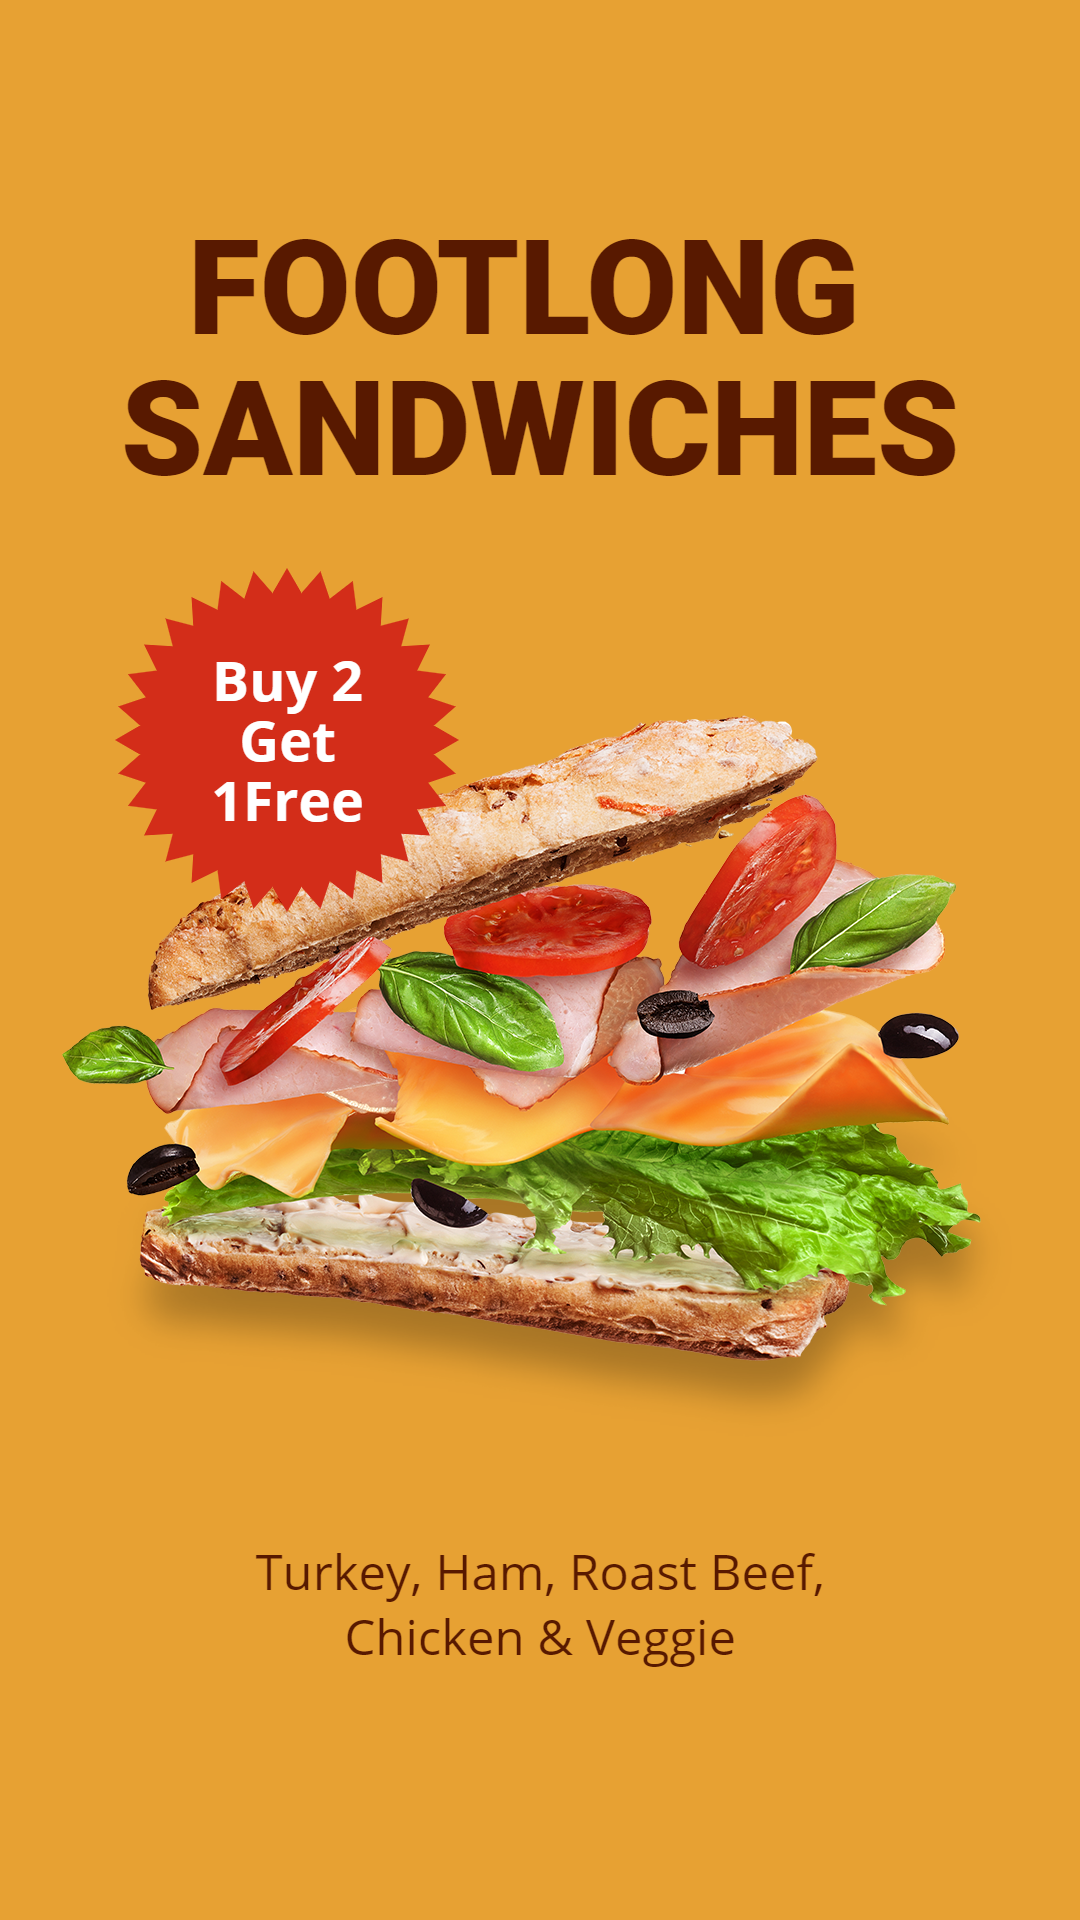 Footlong Sandwiches Sales Ecommerce Story预览效果